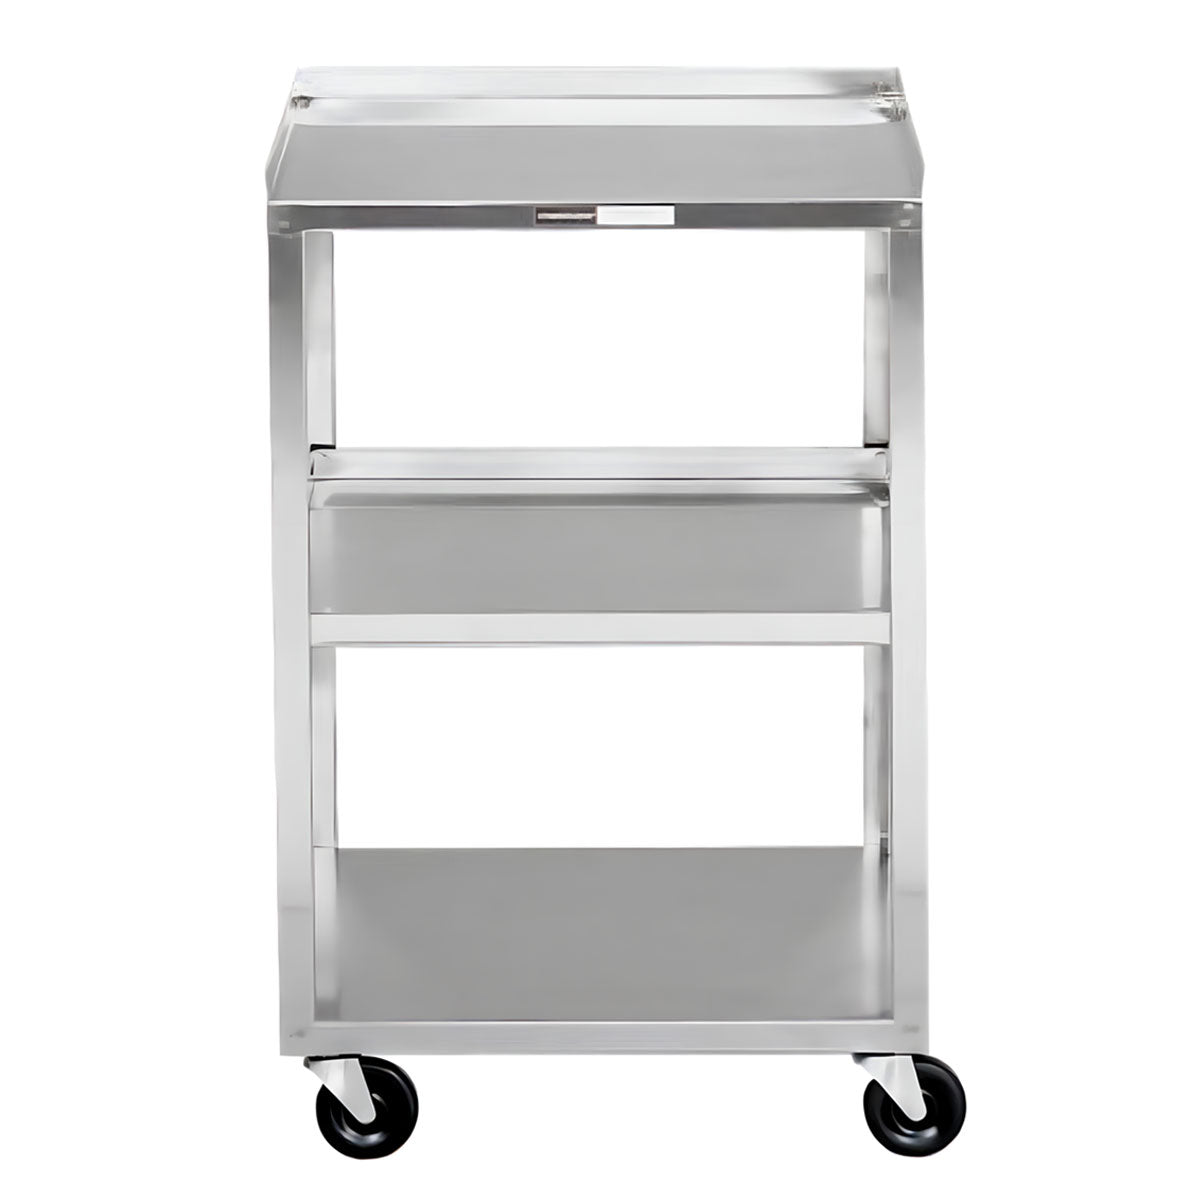 SPAMARC . Trolley . 016 . Stainless Steel